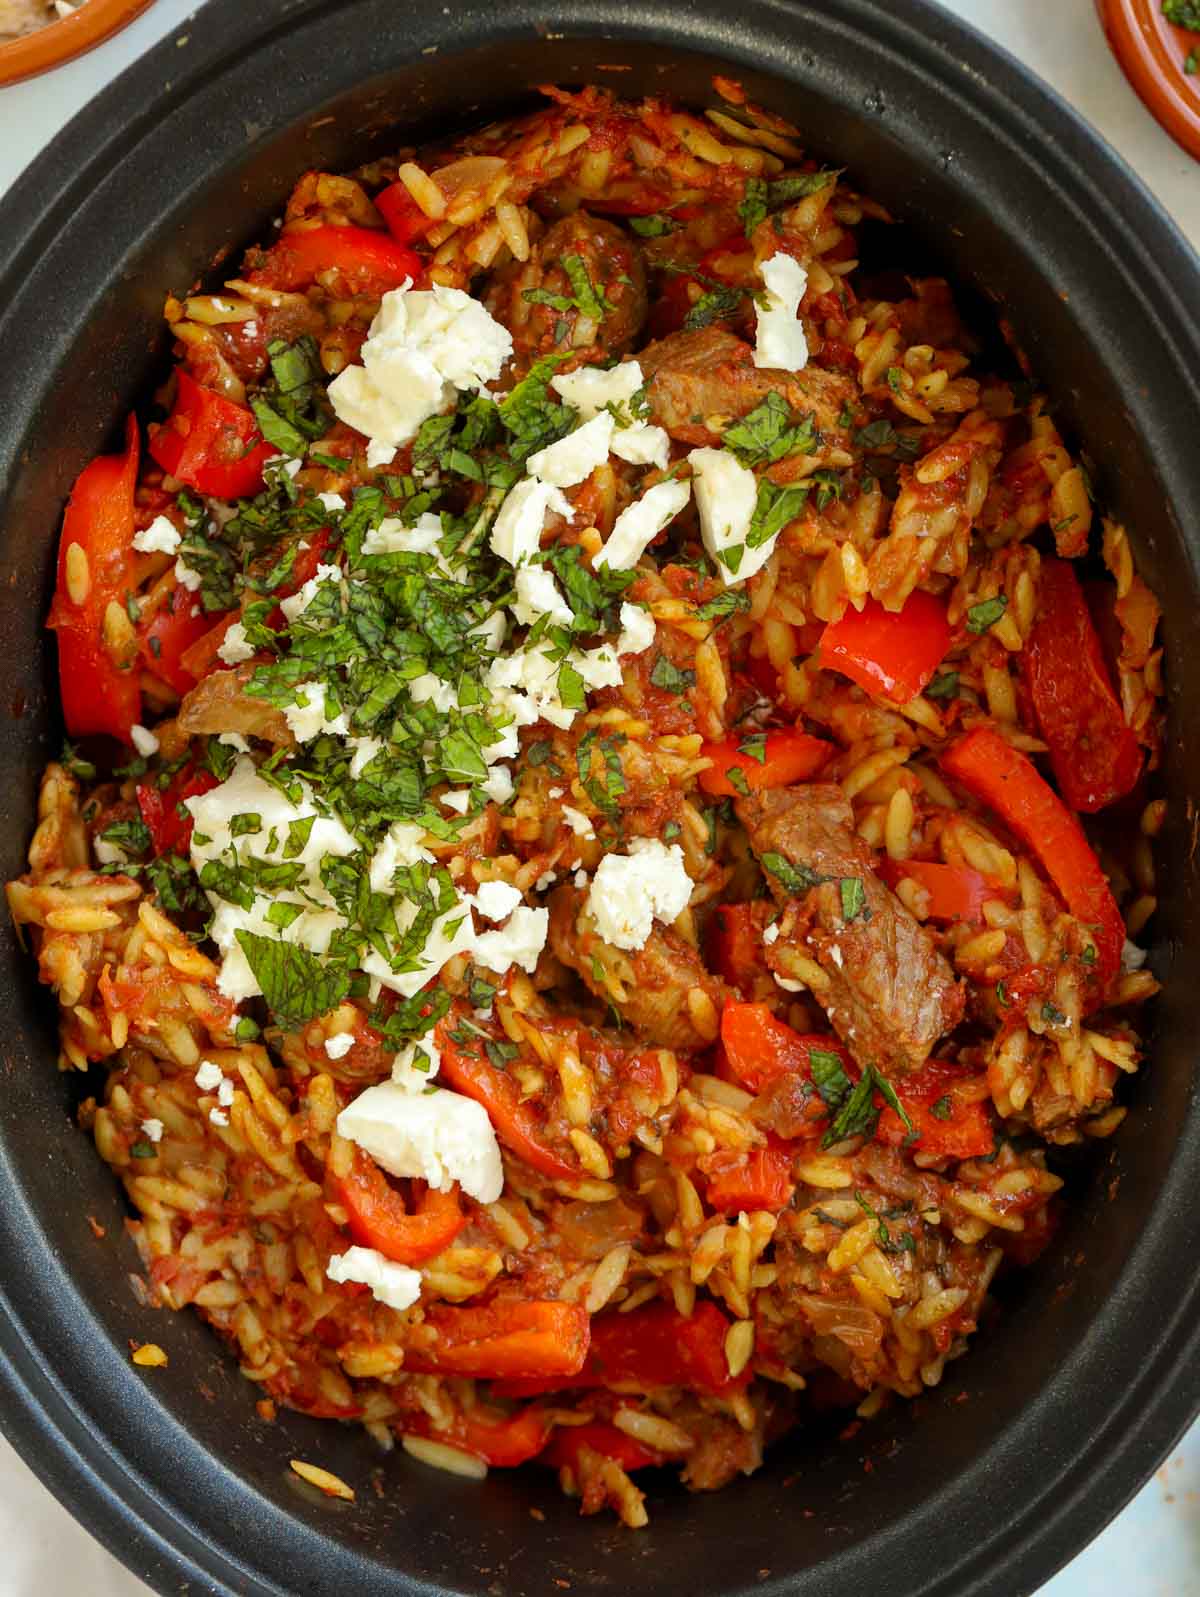 Lamb orzo greek casserole made in the slow cooker